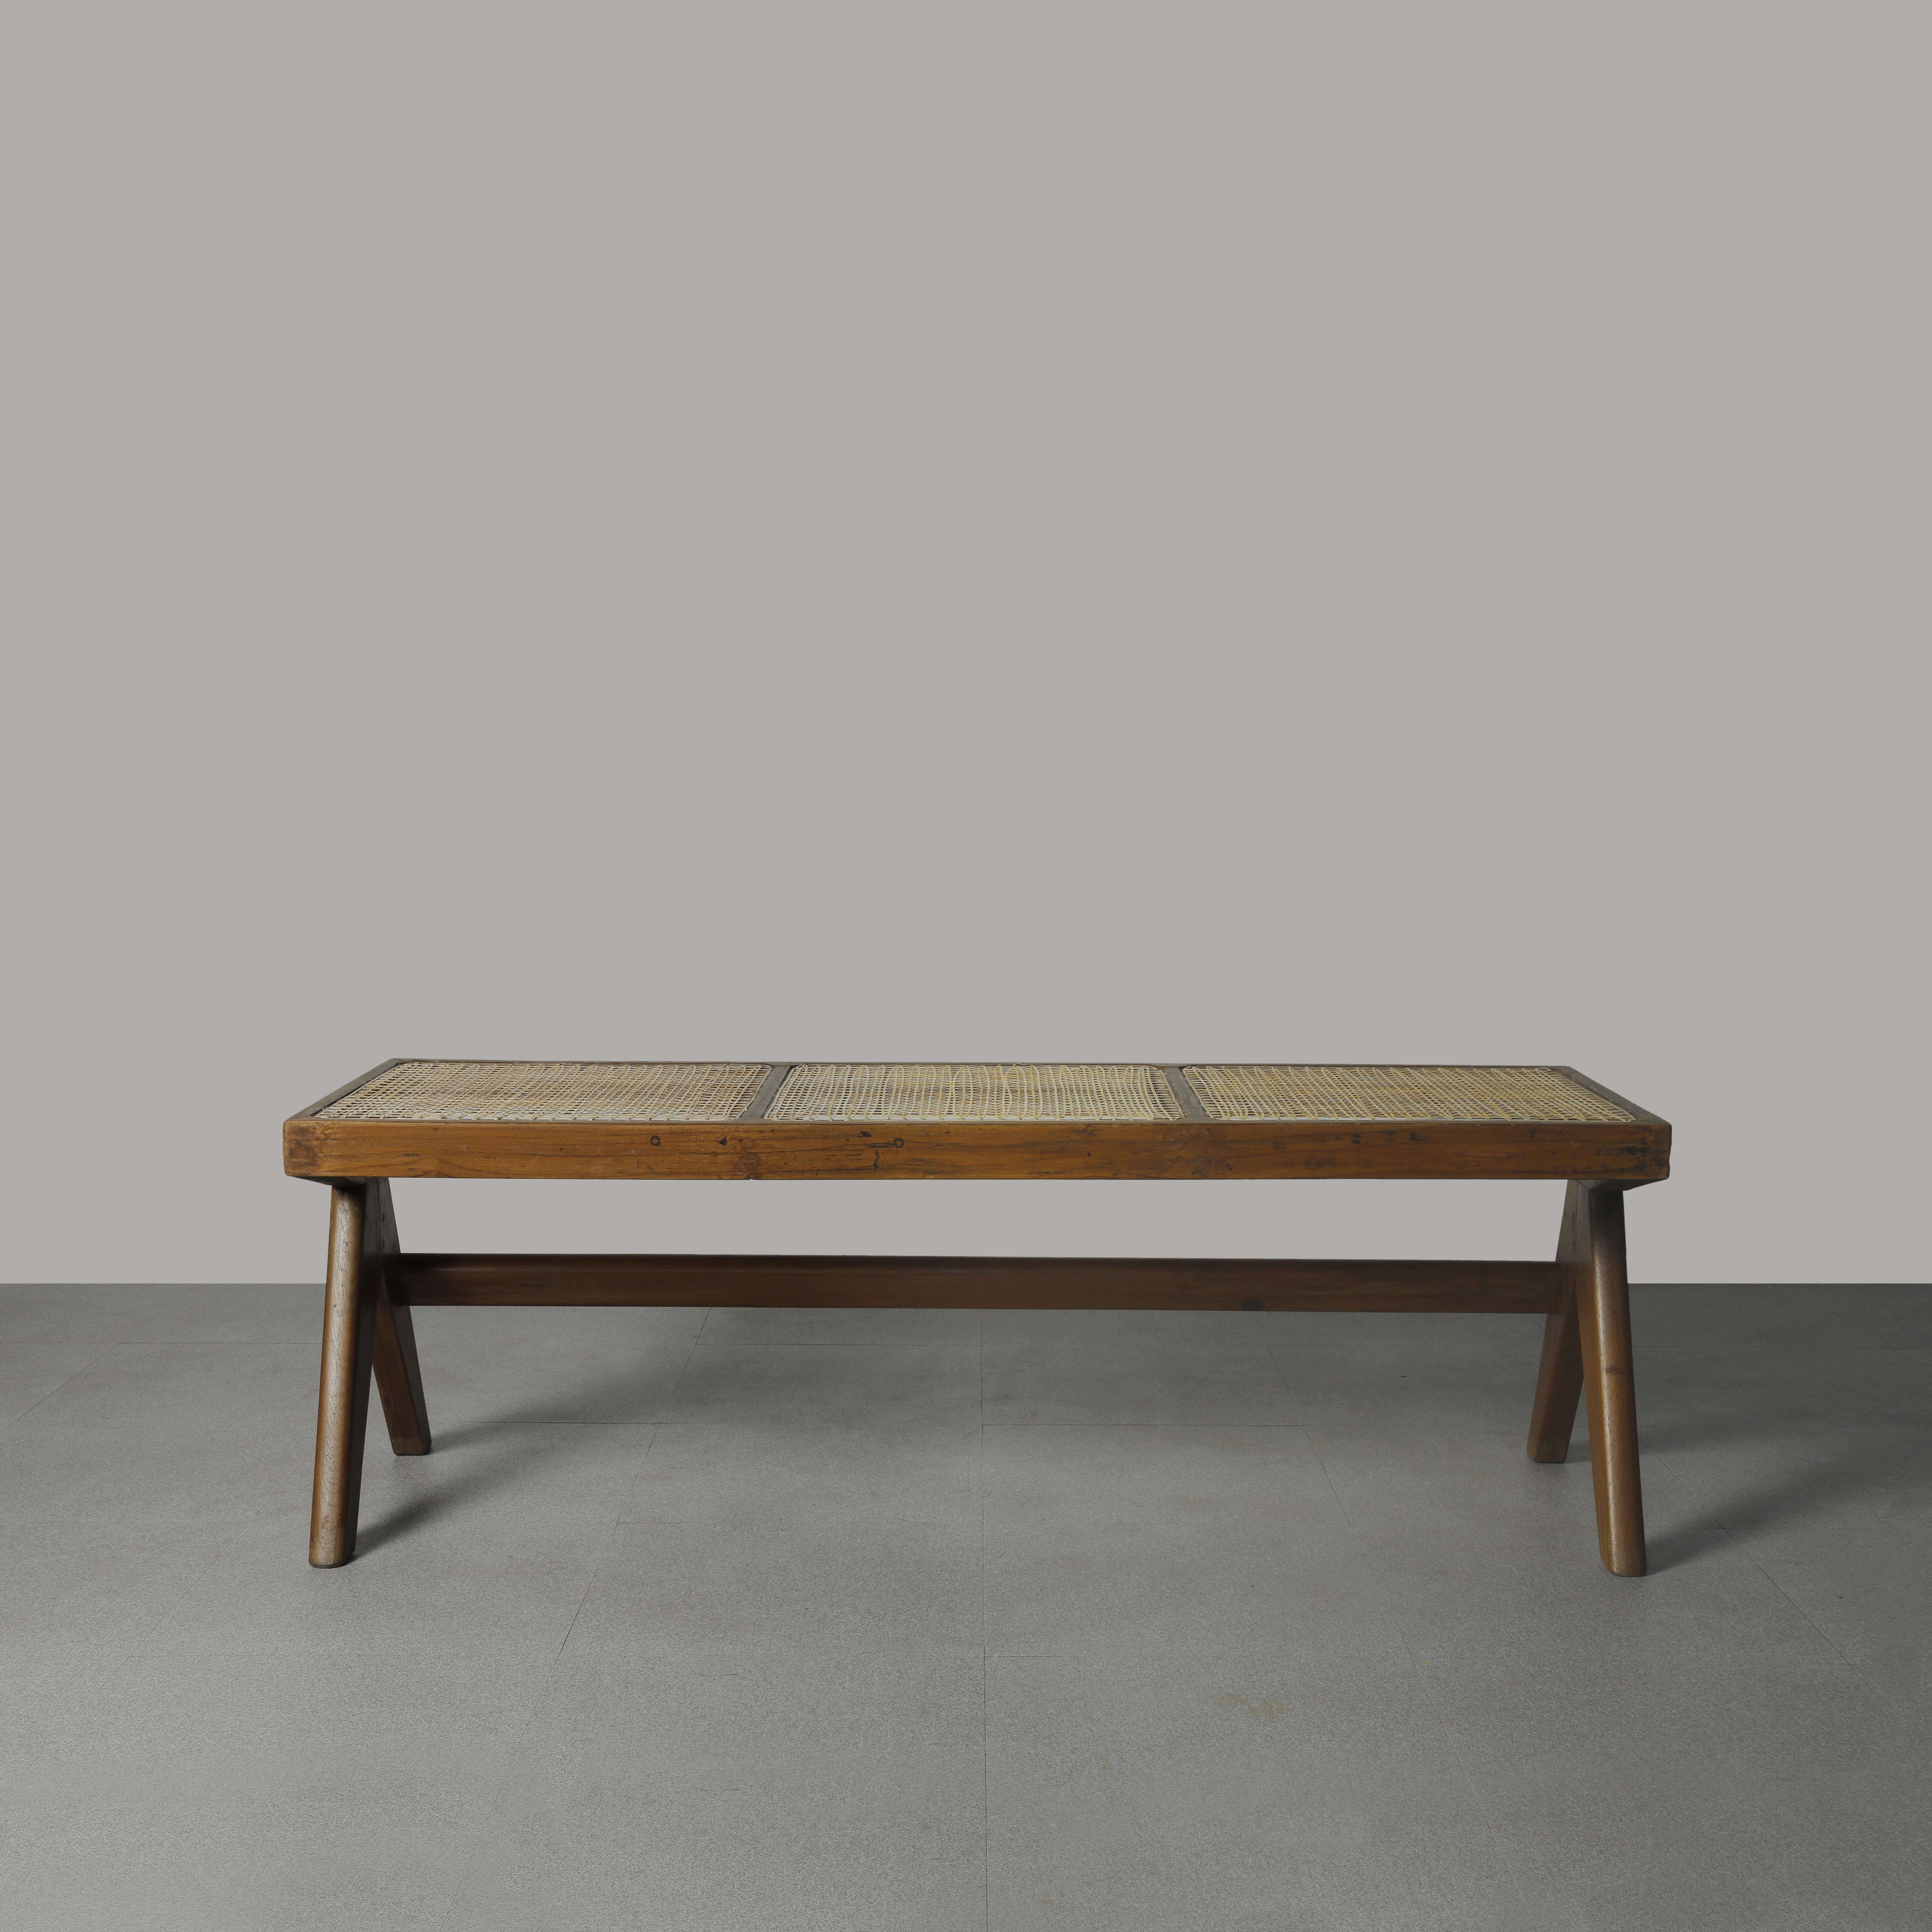 Pierre Jeanneret PJ-SI-33-C Cane Bench / Authentic Mid-Century Modern In Good Condition For Sale In Zürich, CH